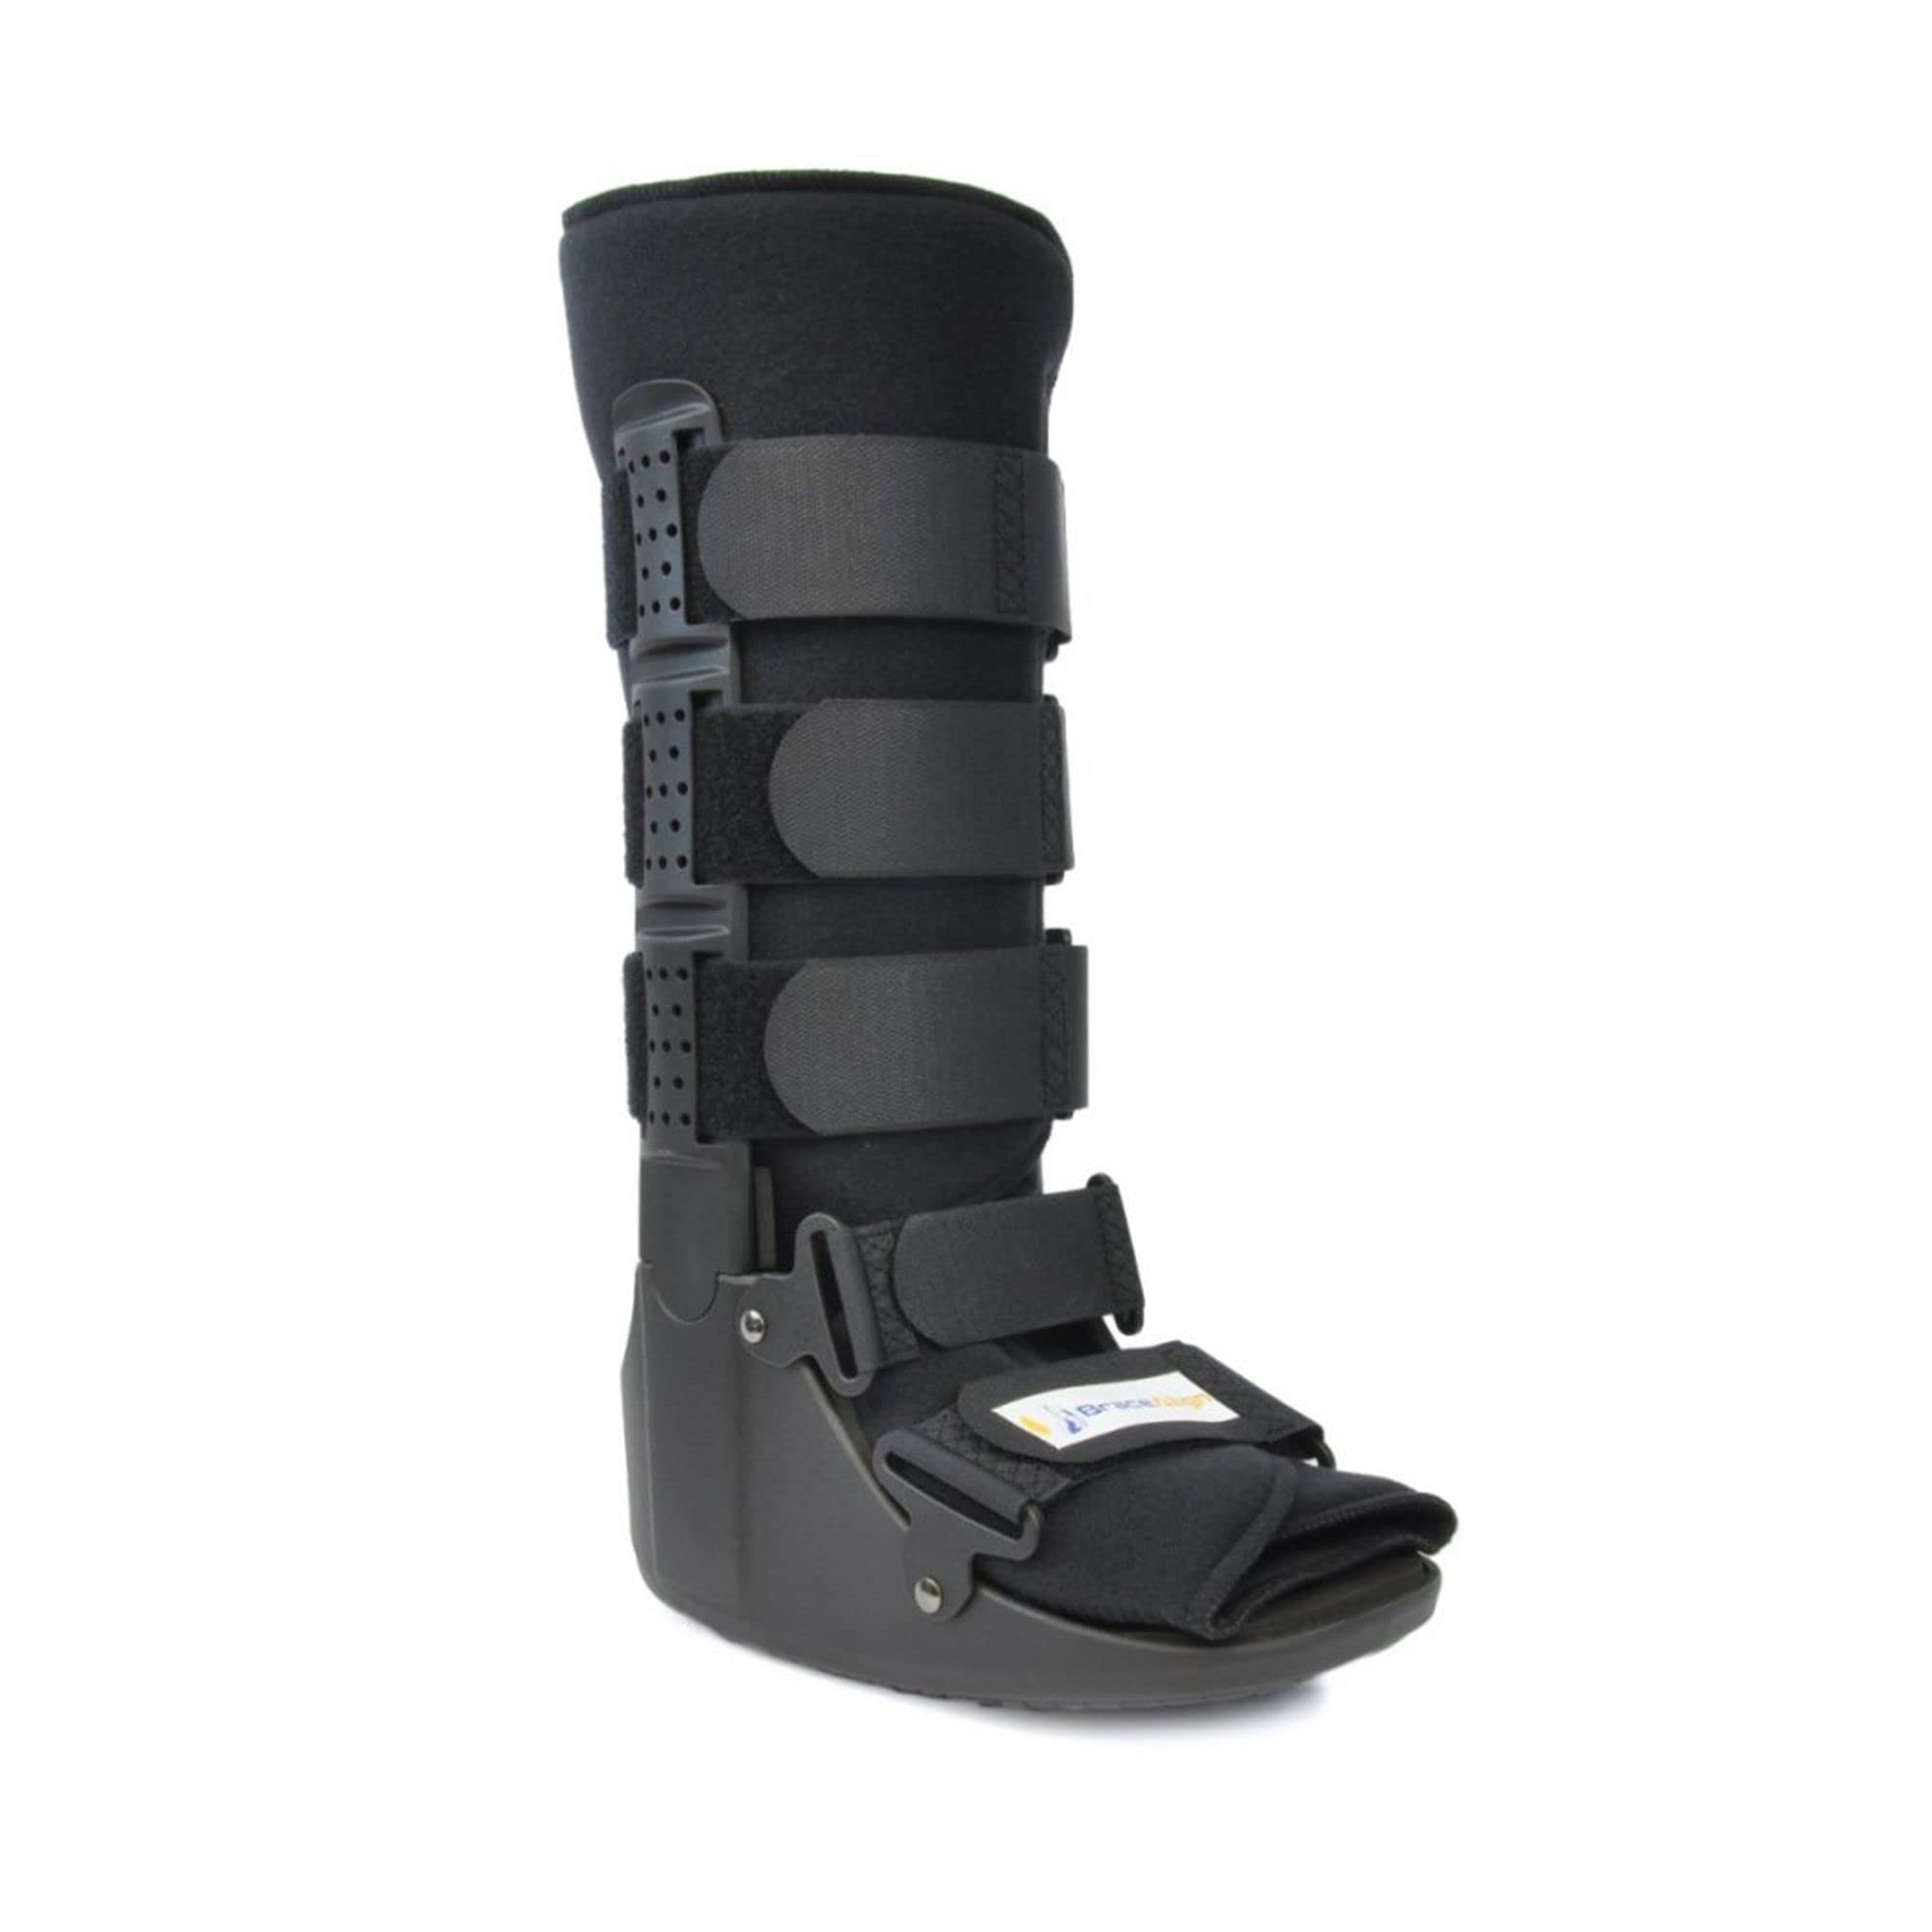 Wide CAM Walker Fracture Orthopedic Boot Tall- Extended Width 2E- Complete Medical Recovery, Protection, Healing and Boot- Toe Foot or Ankle Injuri...